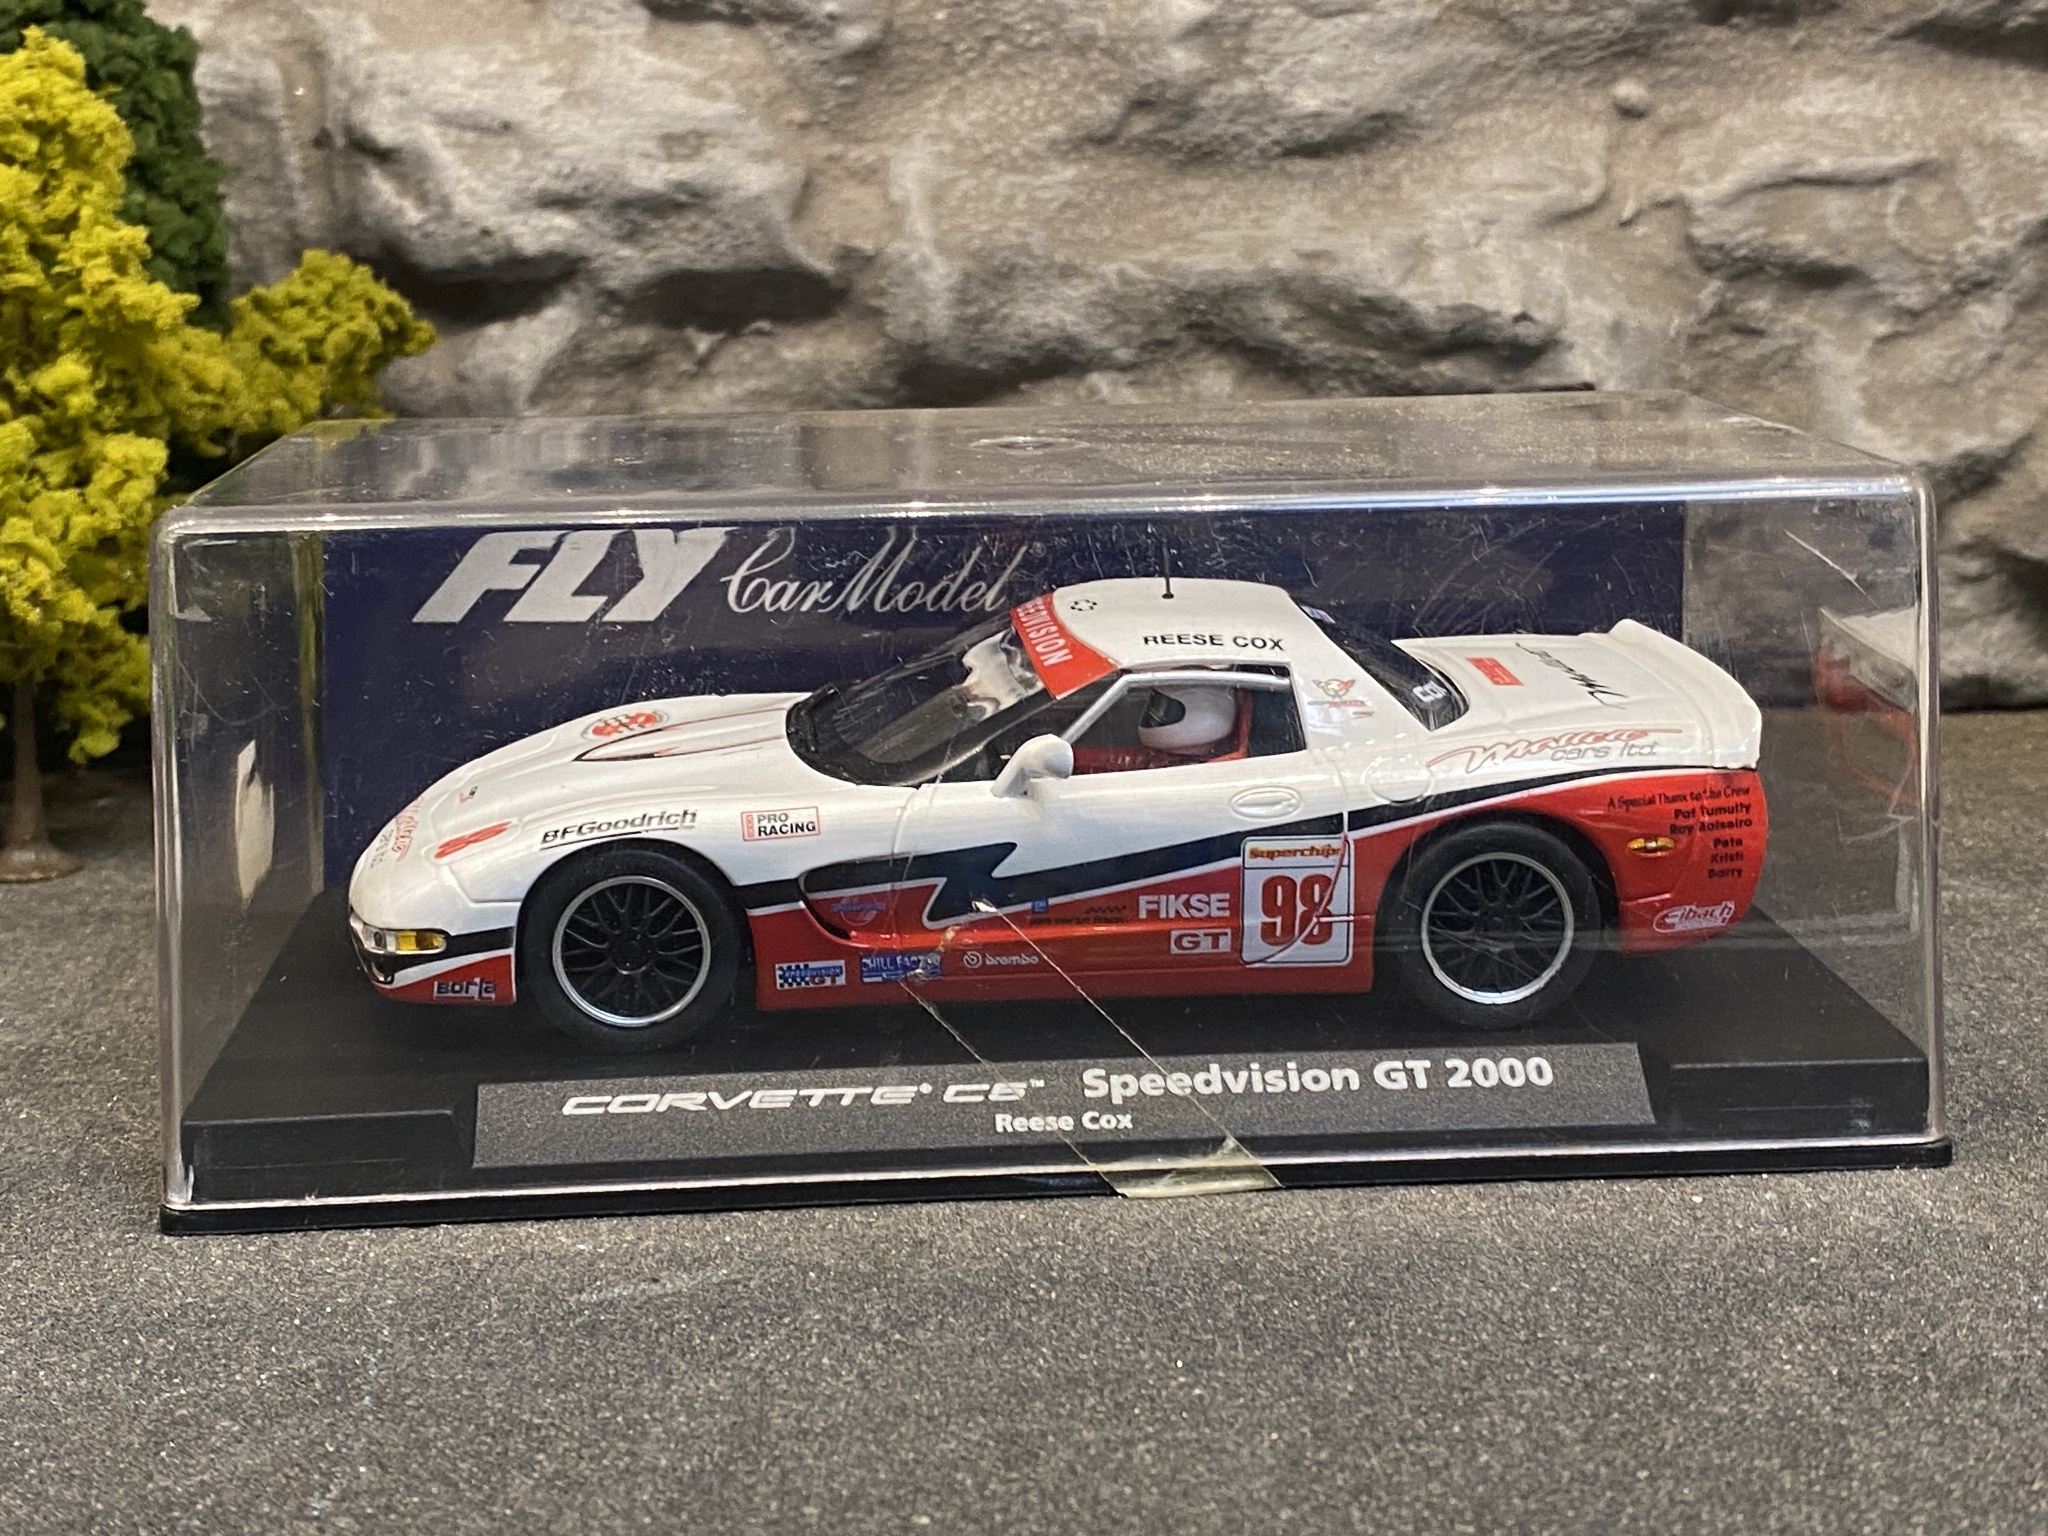 Scale 1/32 Analogue FLY slotcar: Chevrolet Corvette C5, #98, Speedvision GT 2000